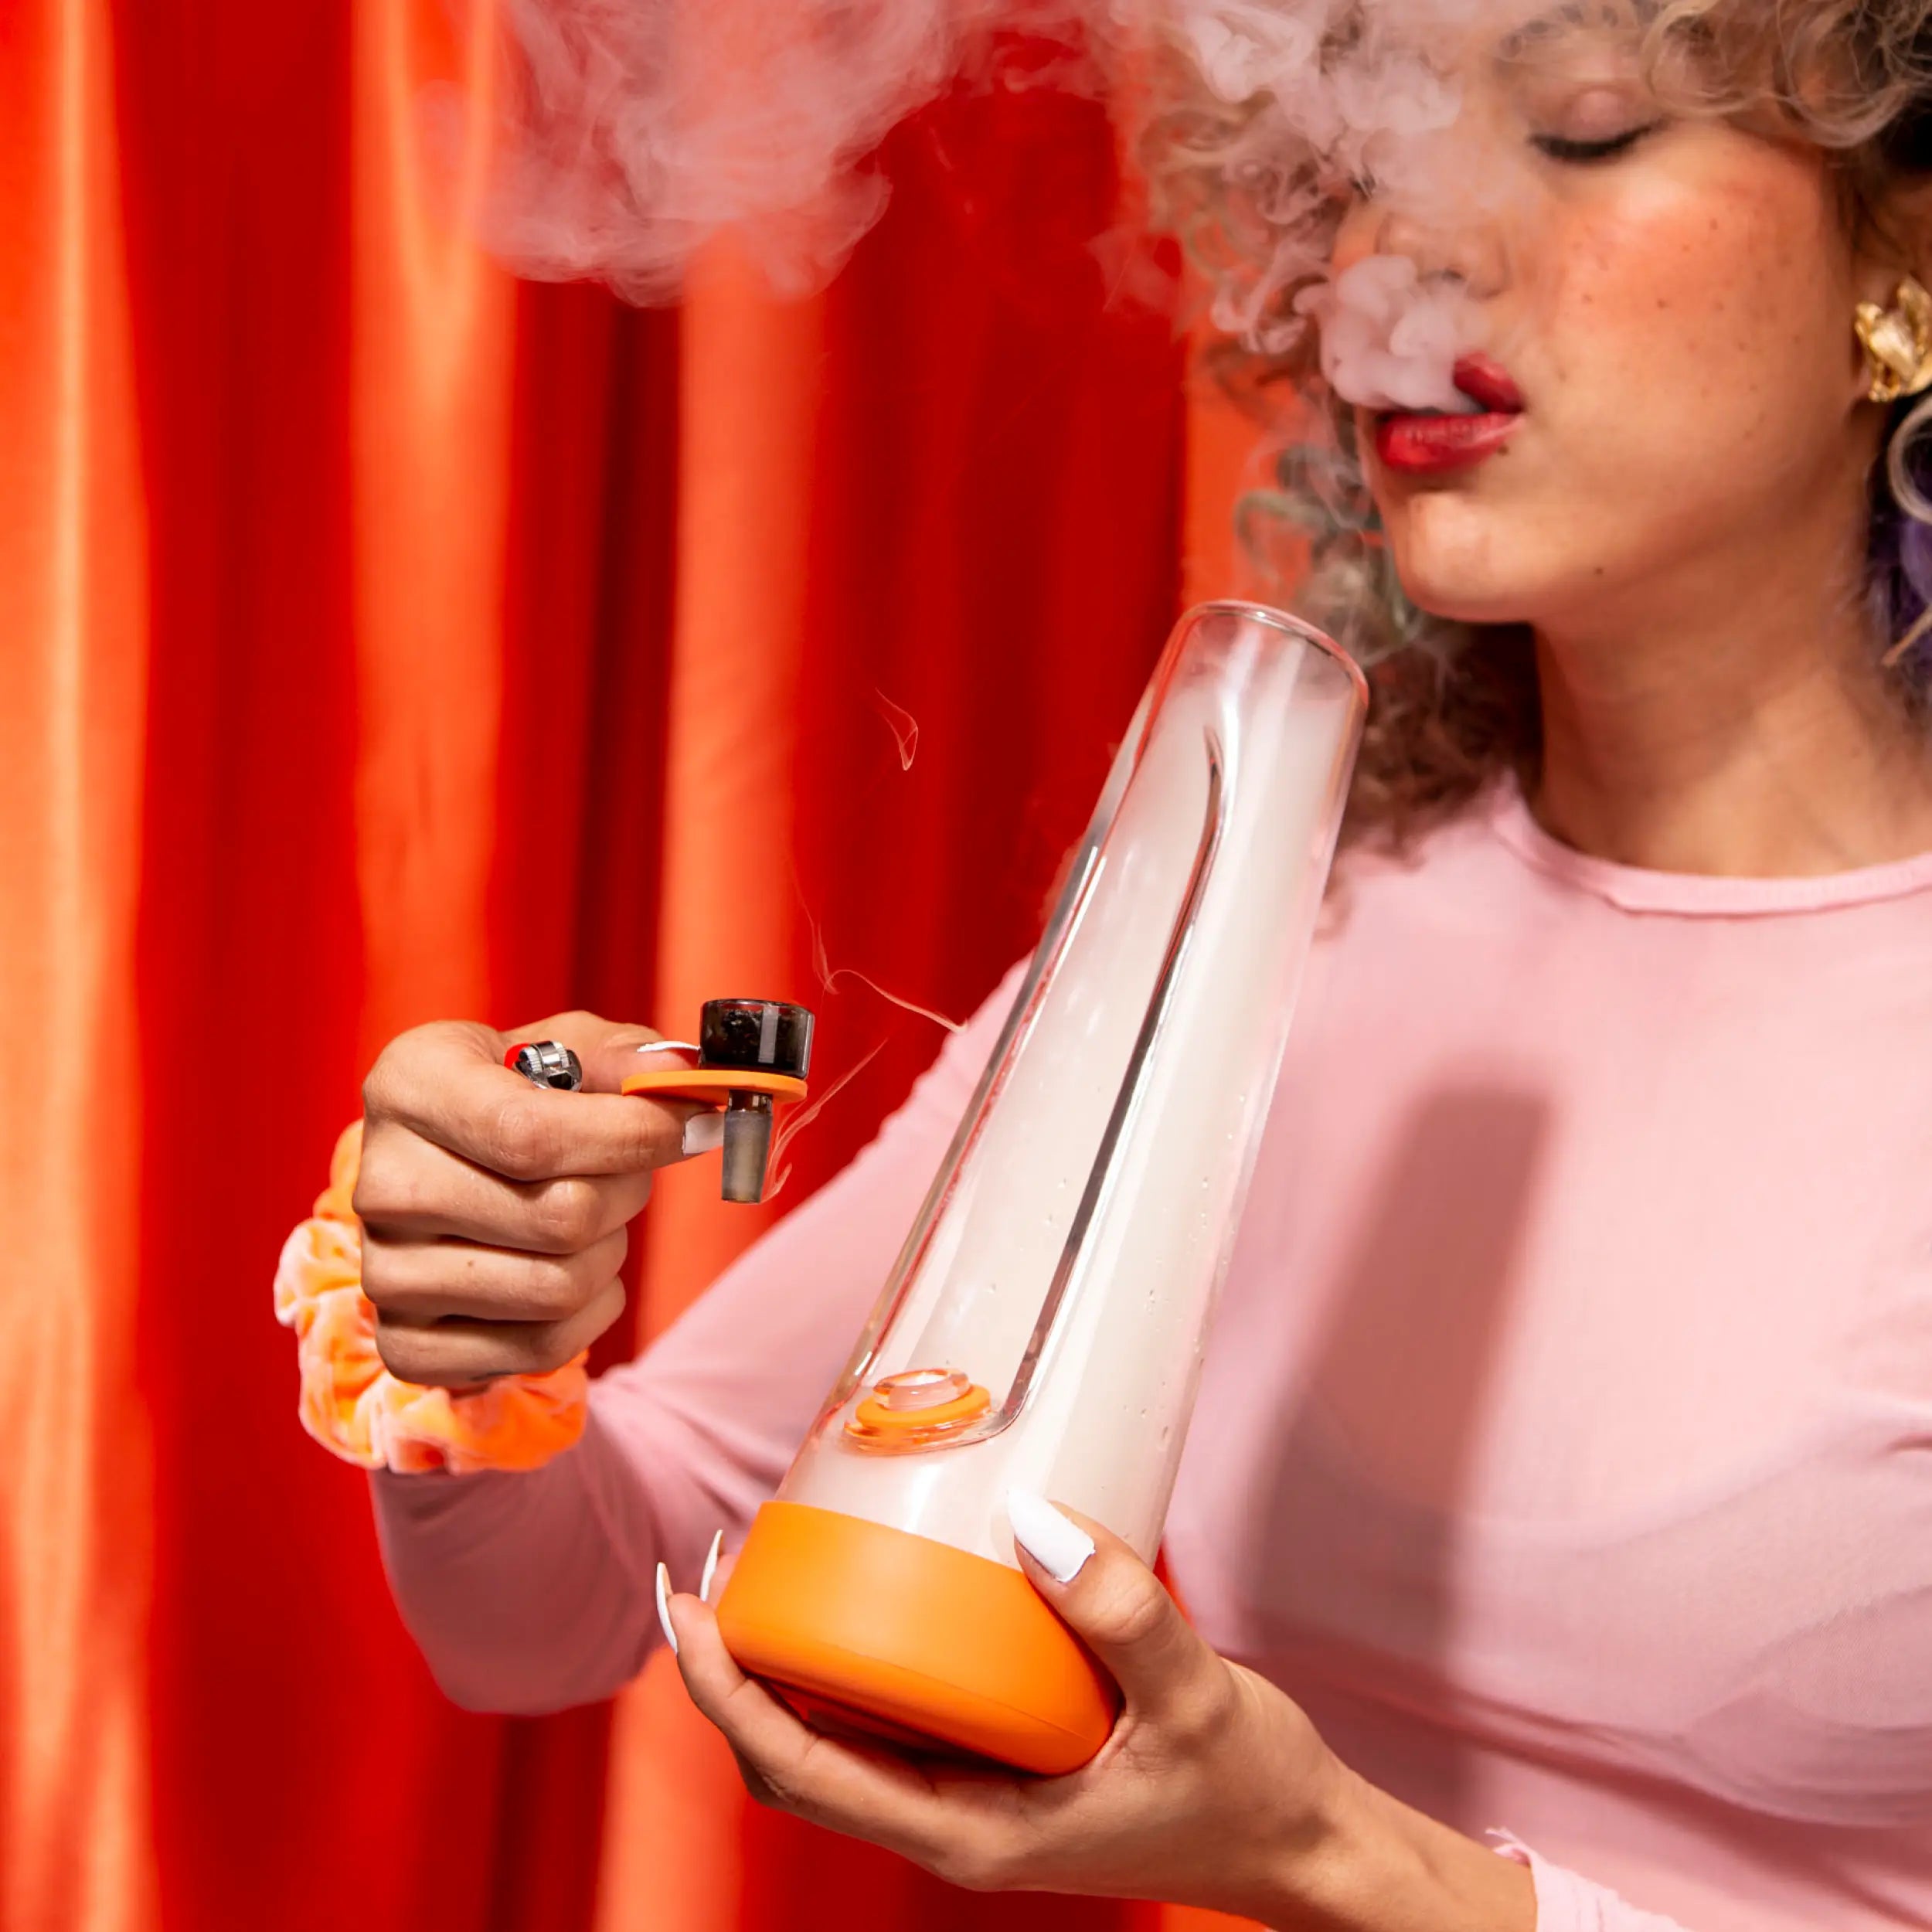 its 4:20! Sale, up to 50% off model smoking from a session goods bong in horizon orange colorways.